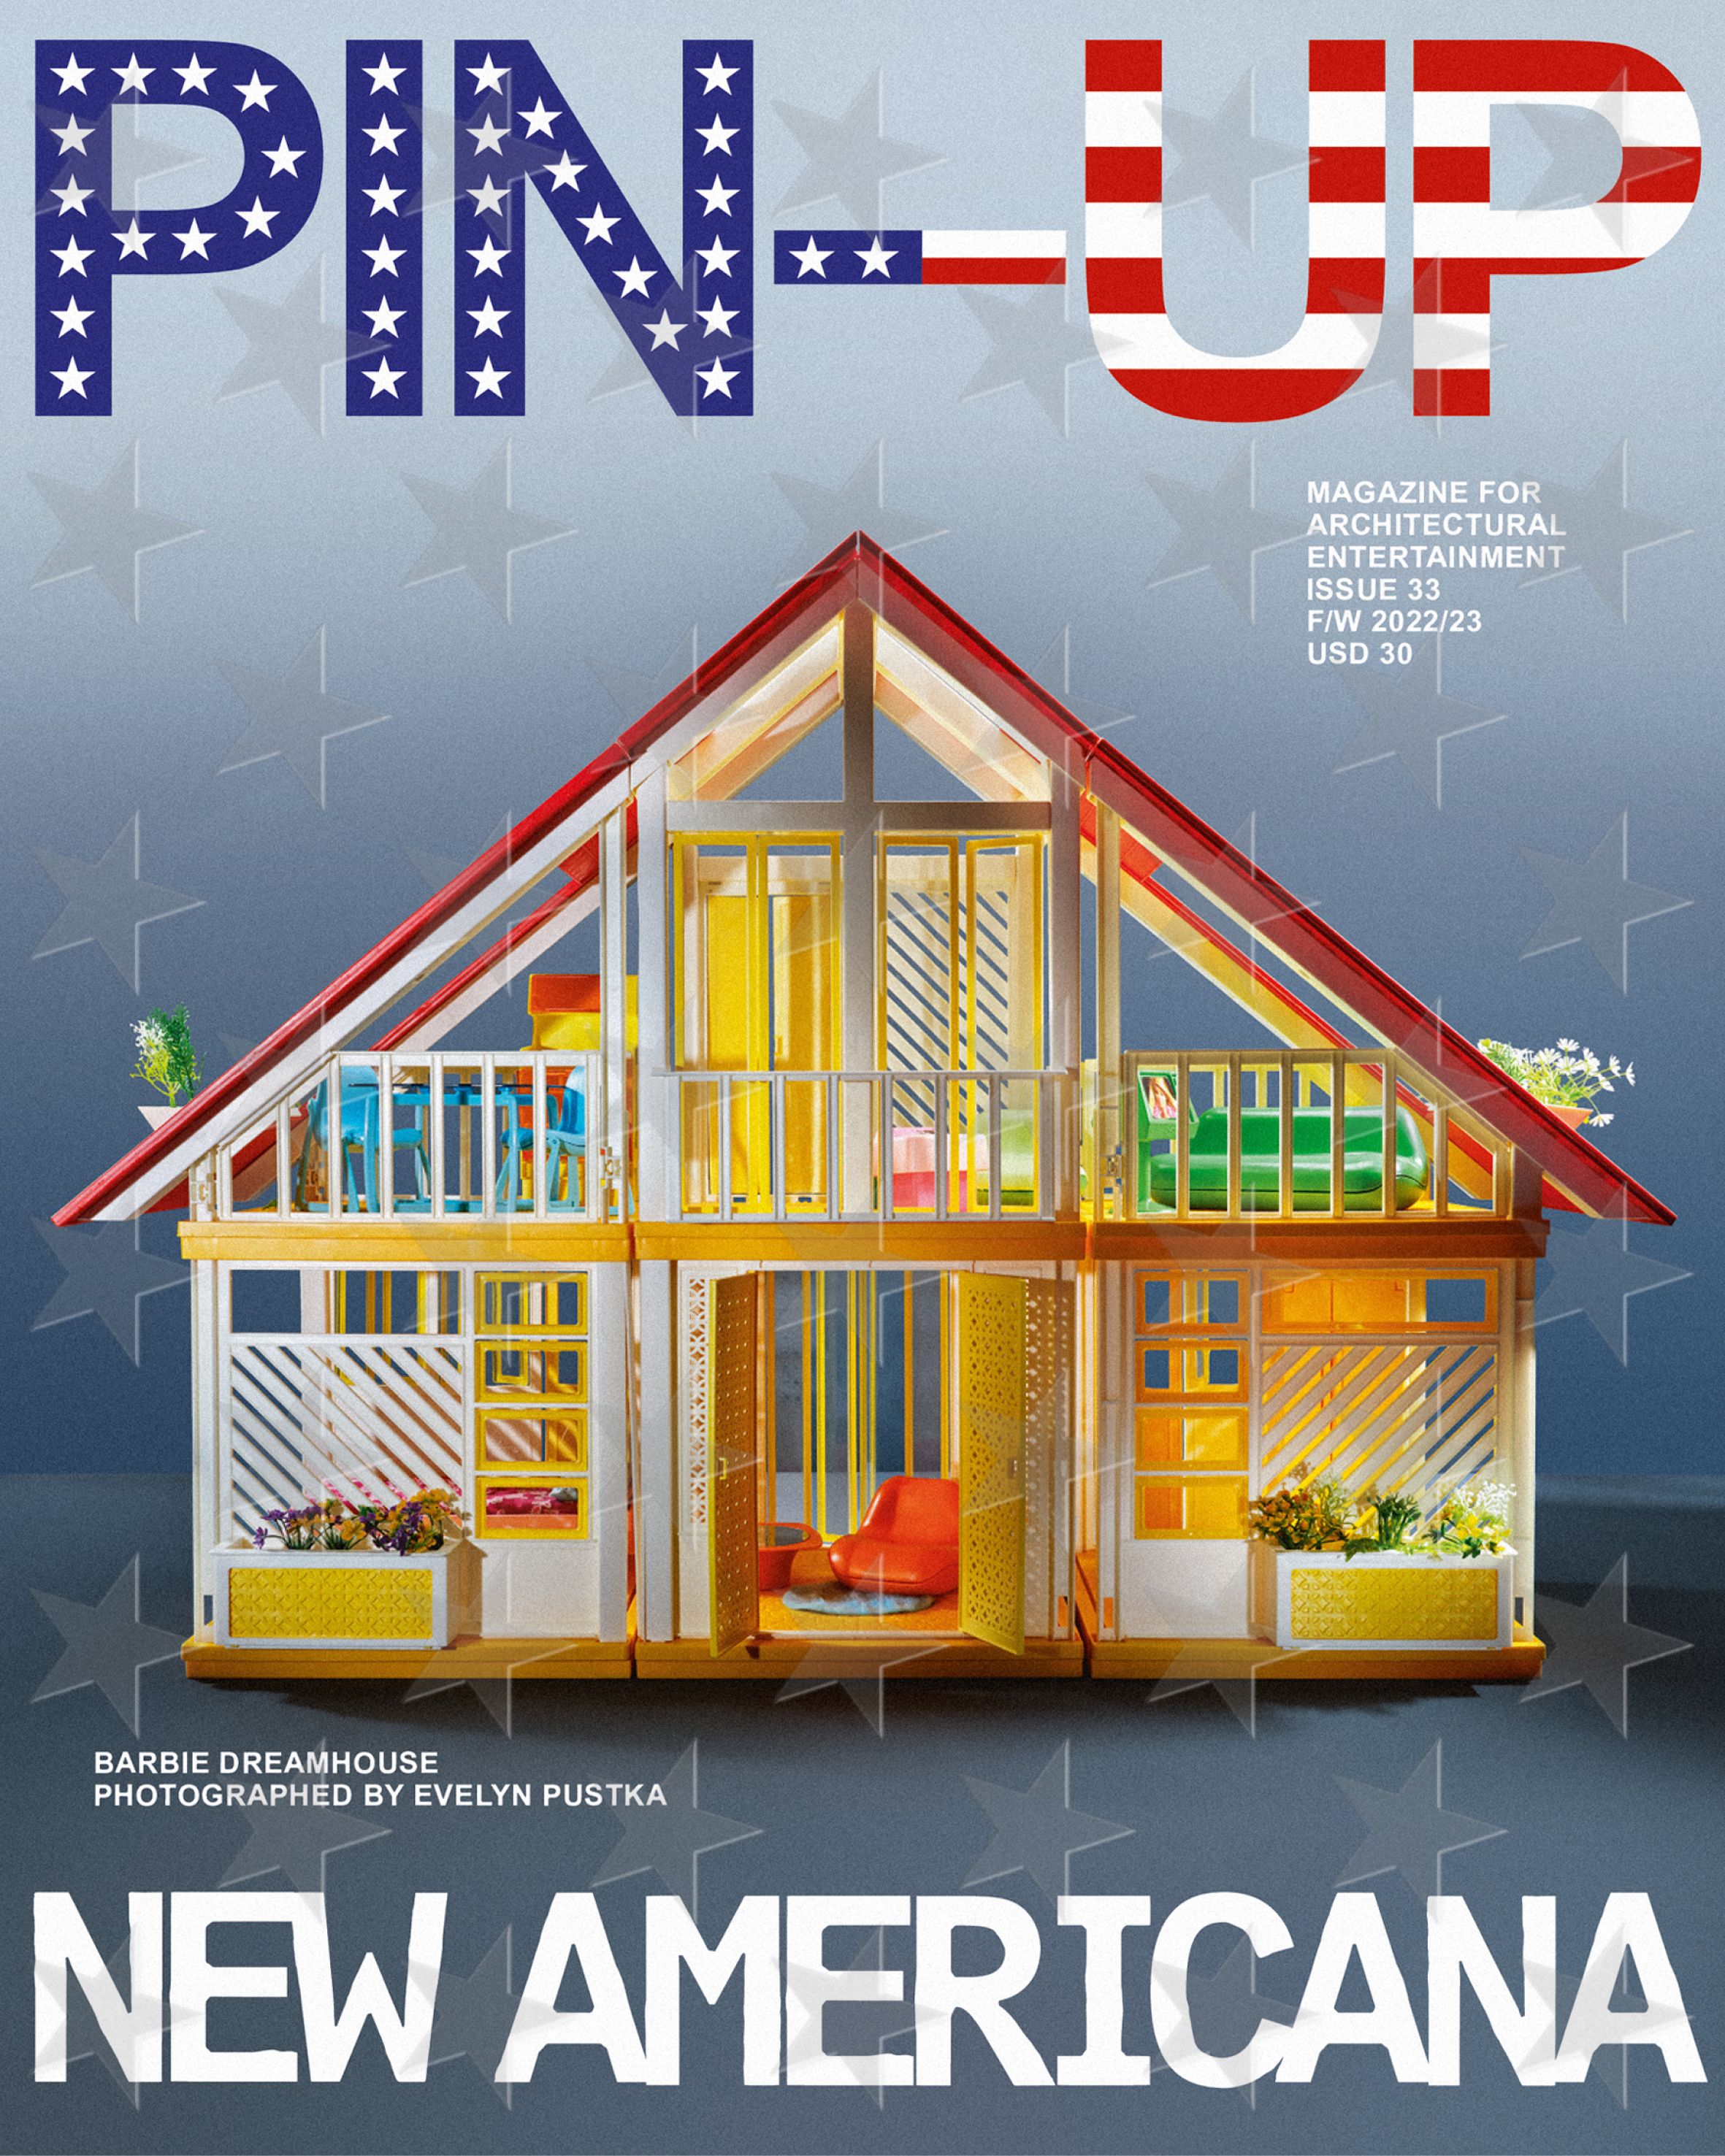 PIN–UP | Issue 33, NEW AMERICANA (BARBIE), F/W 2022/23